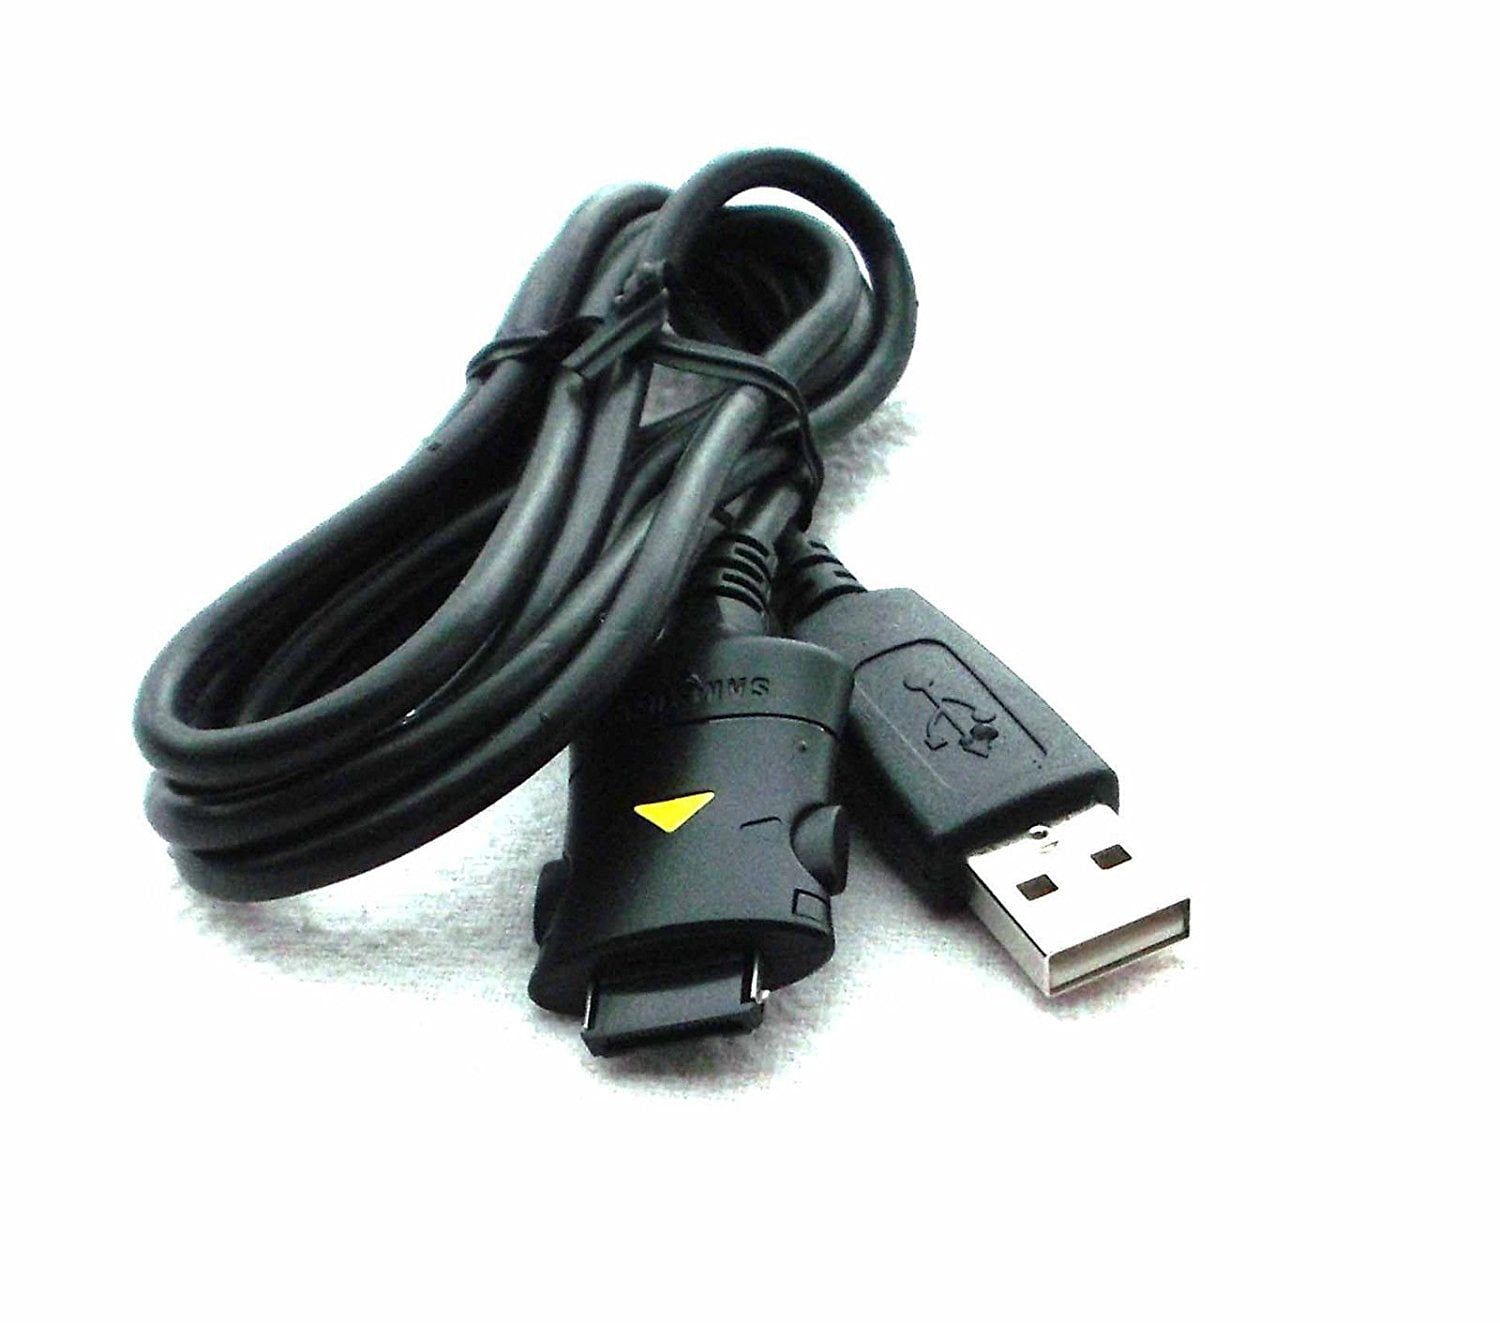 KASINGS USB Cable Sync Data Cord Adapter Replacement for Samsung SPH-A740/PM-A740 SPH-A760/RL-A760